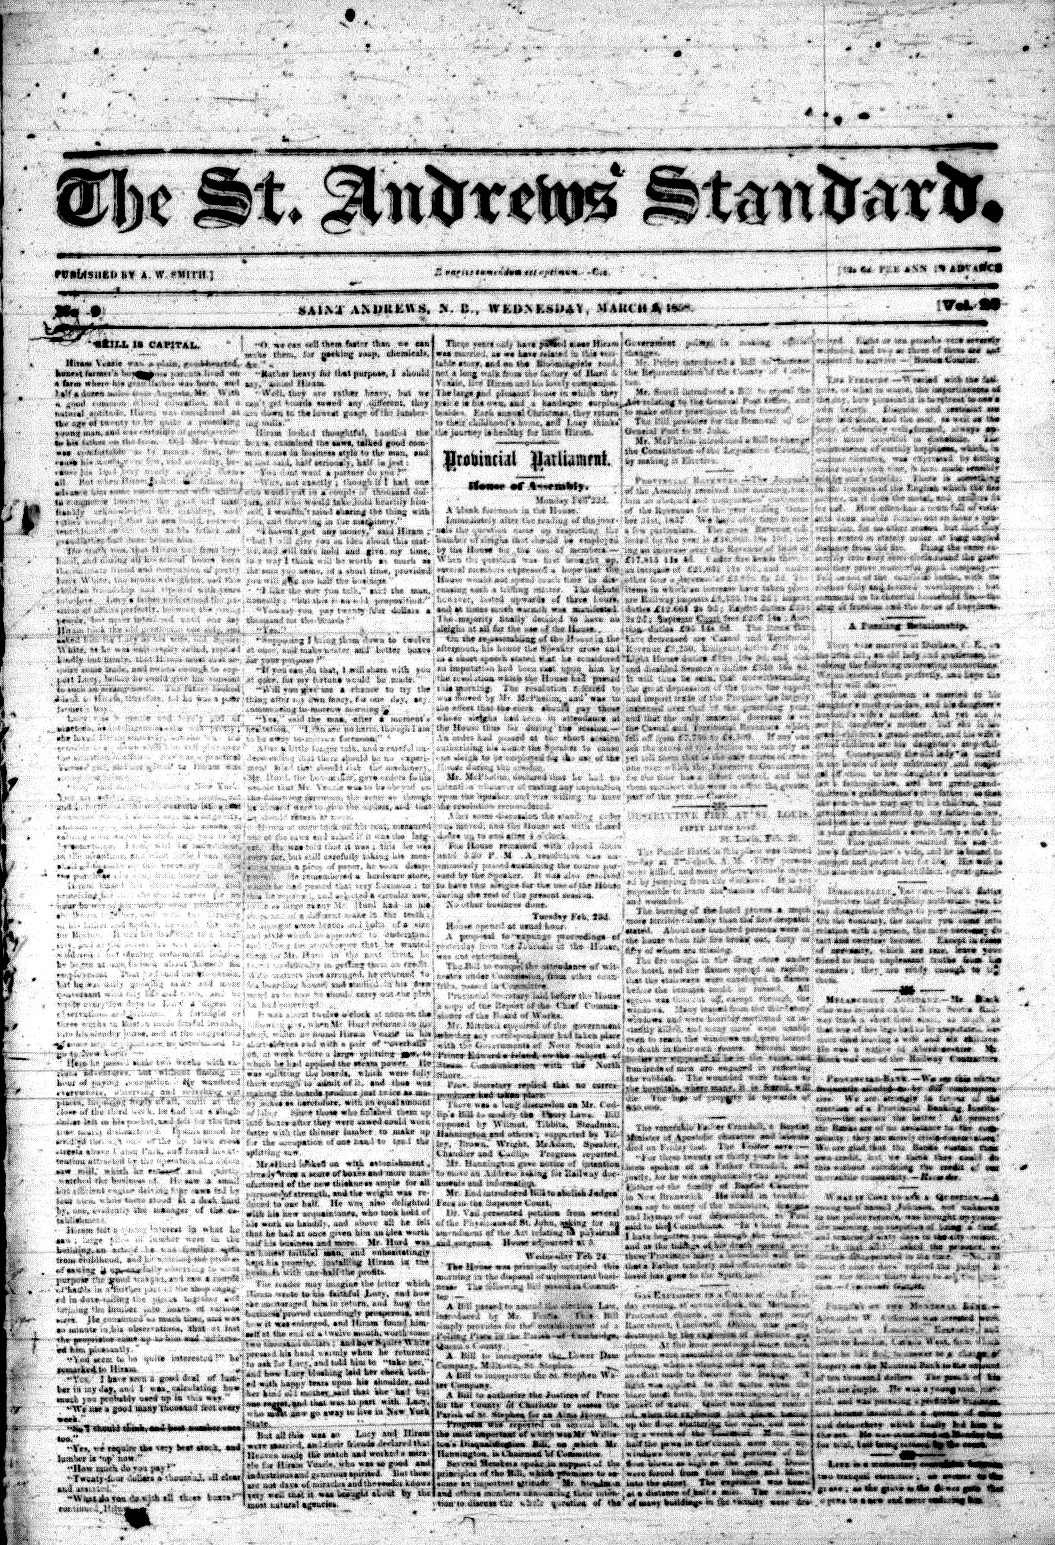 St. Andrews Standard (1856) New Brunswick Historical Newspapers Project